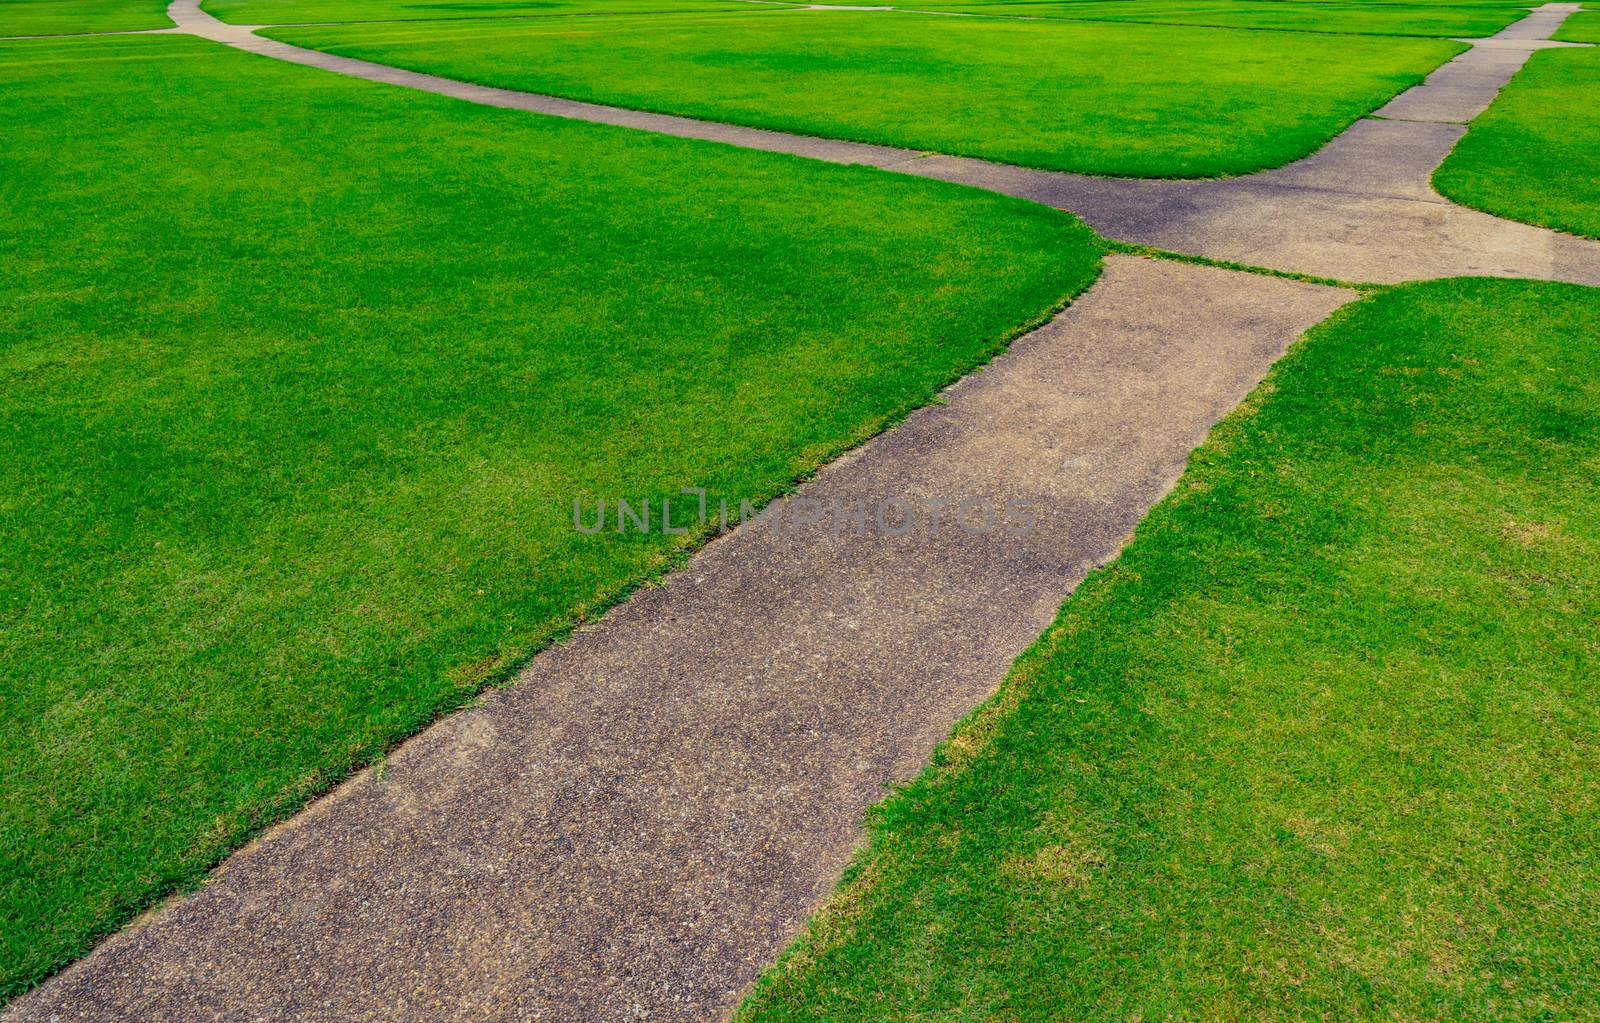 Green grass field with line pattern texture background and walkway by Fahroni